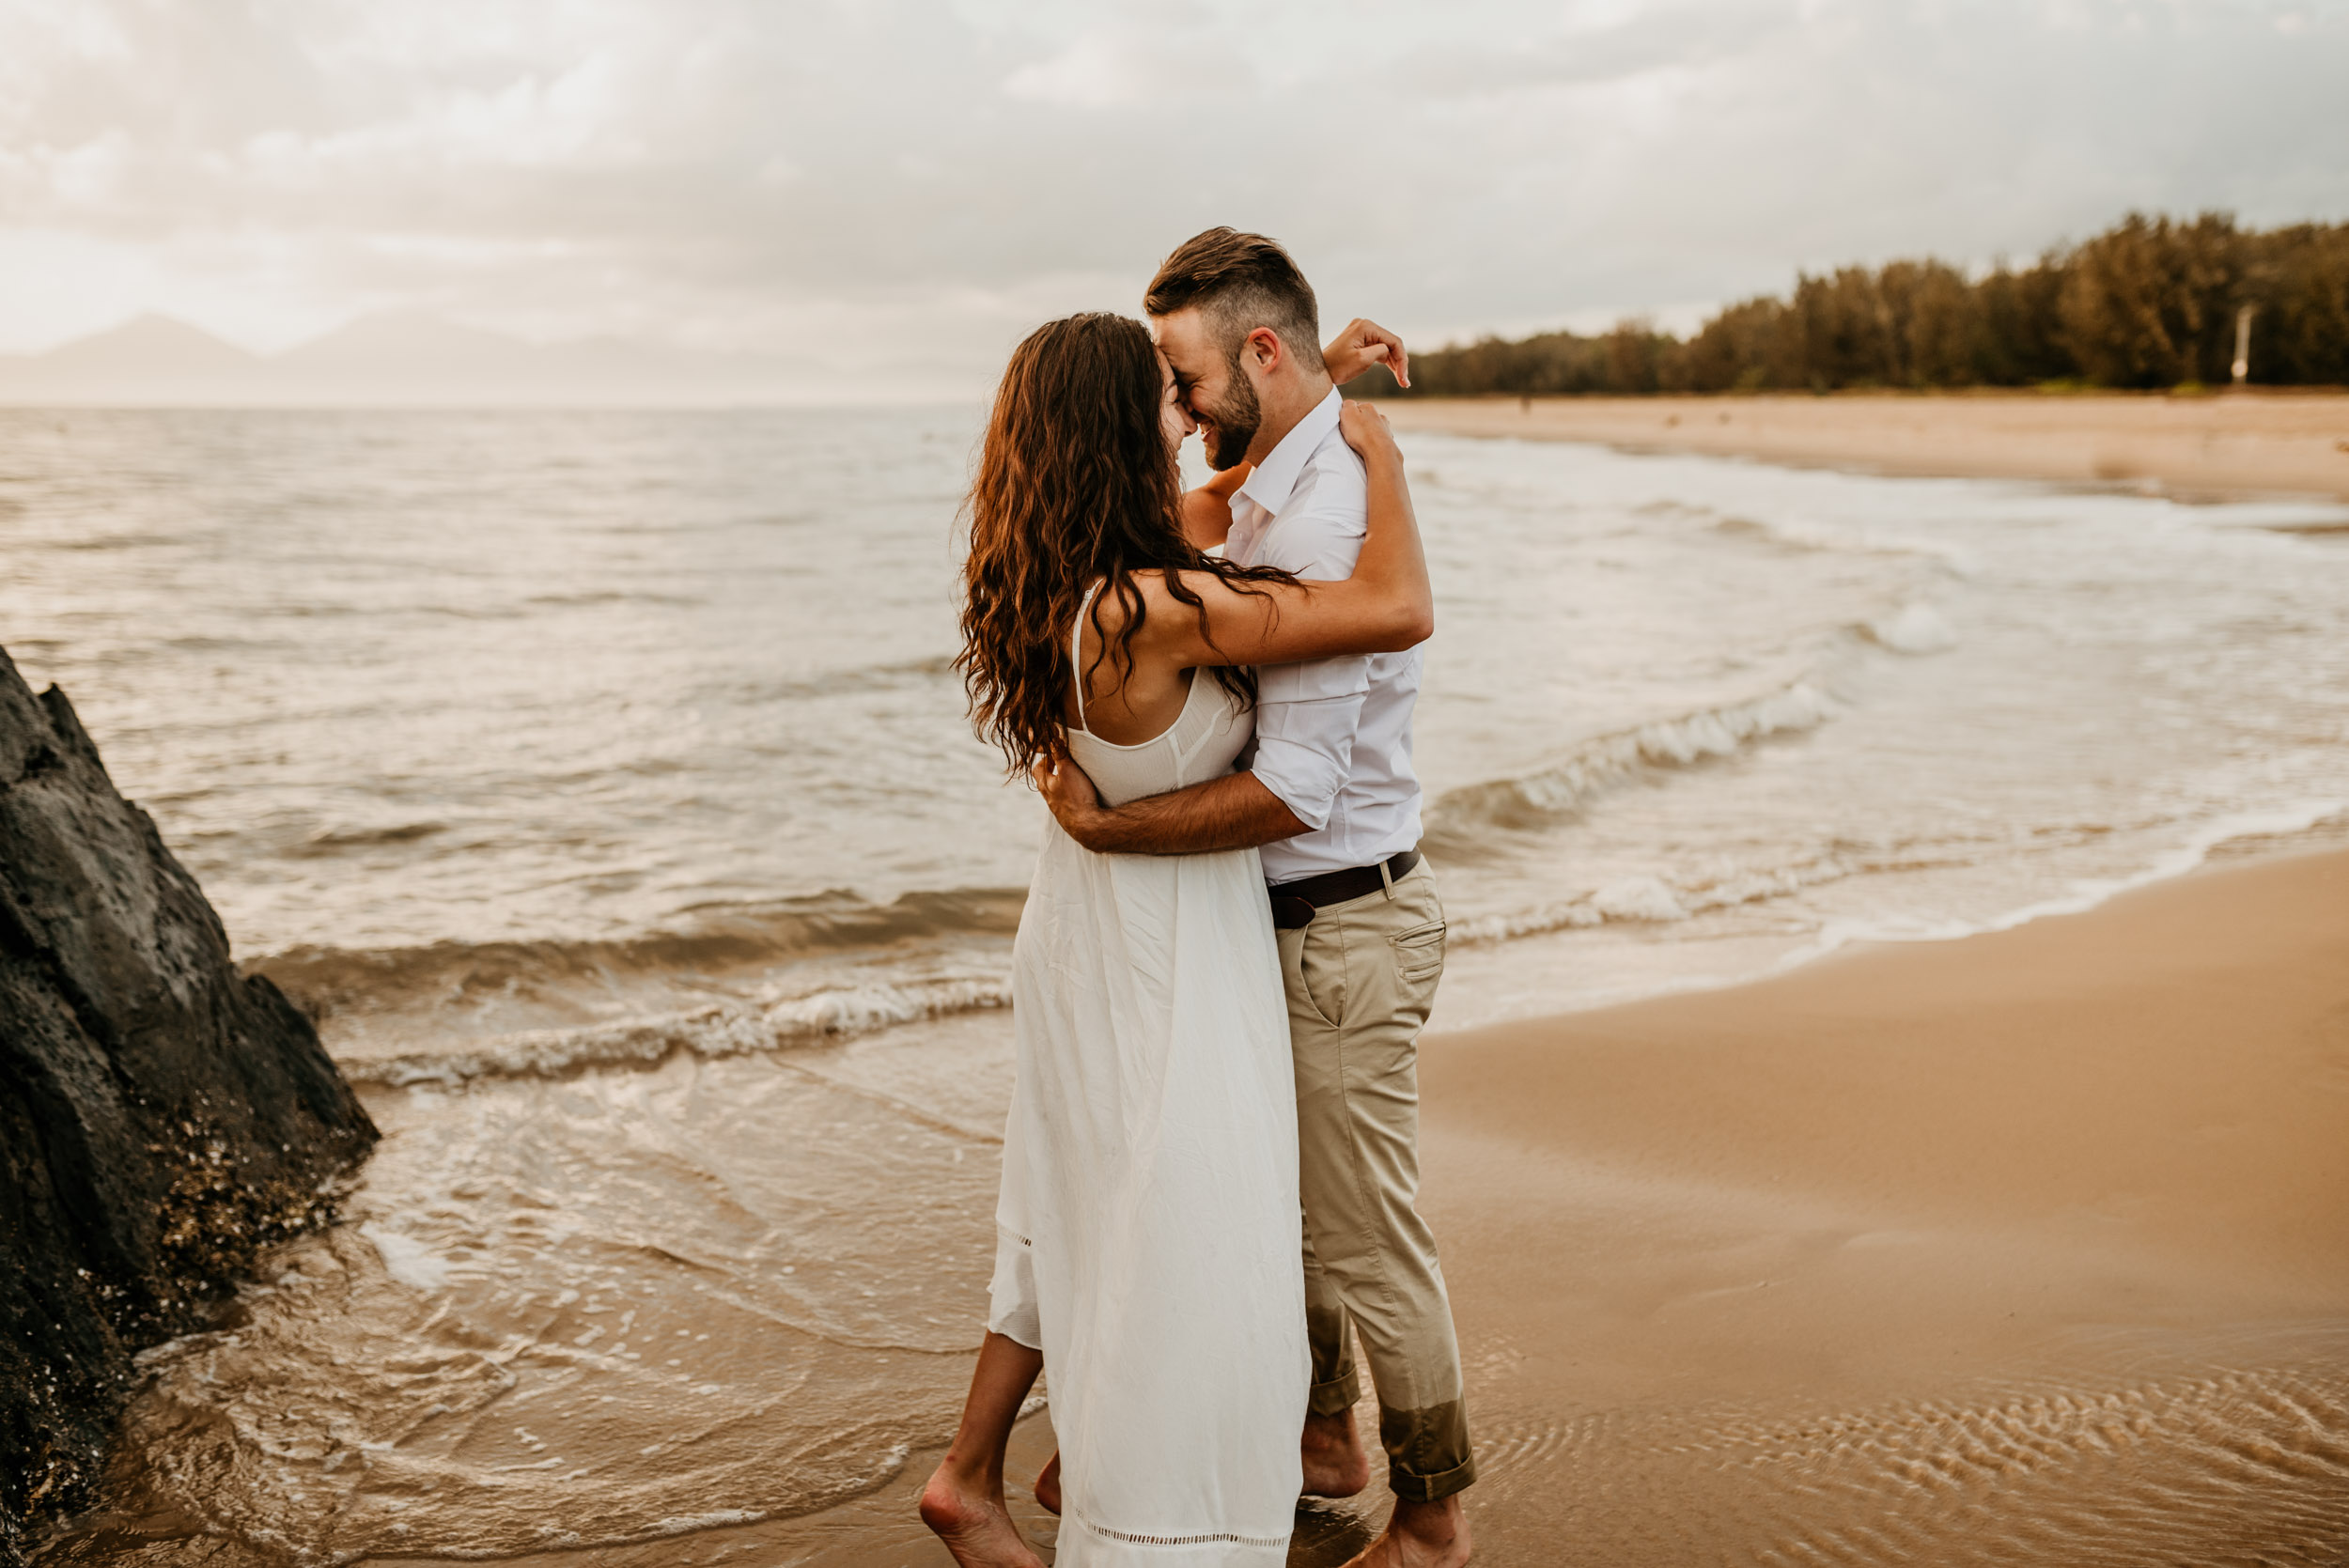 The Raw Photographer - Cairns Wedding Photographer - Engaged Engagement - Beach location - Candid Photography Queensland-33.jpg